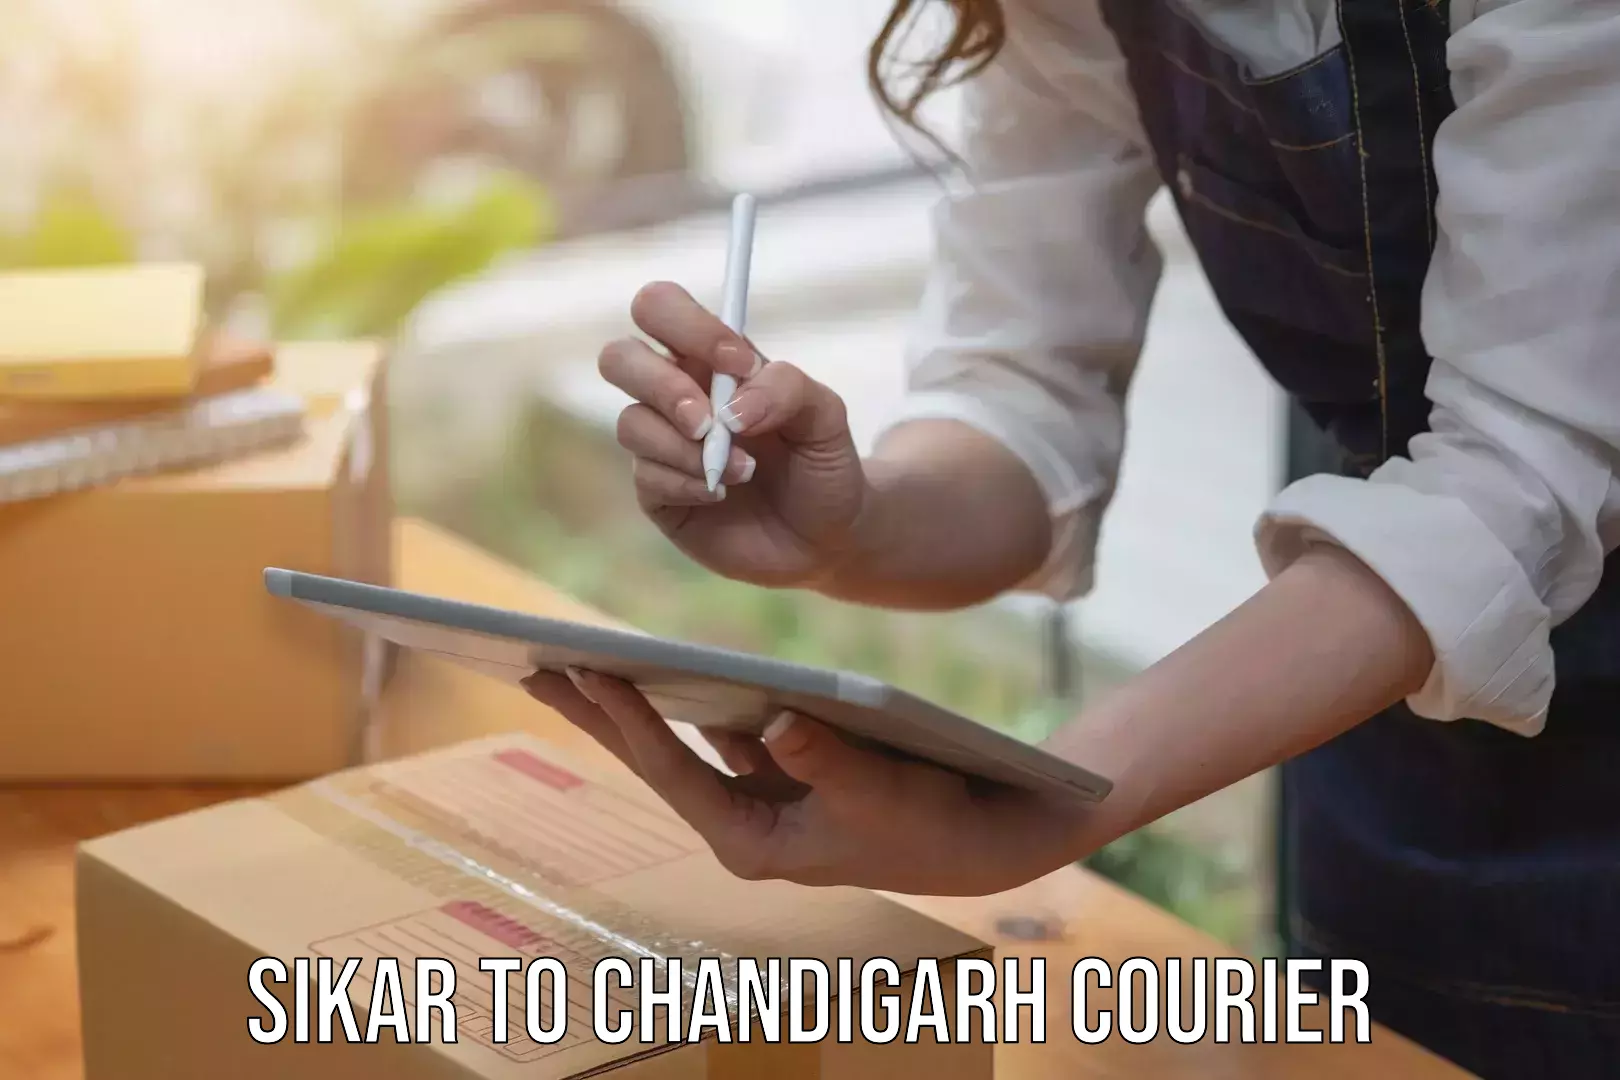 Courier service comparison Sikar to Chandigarh